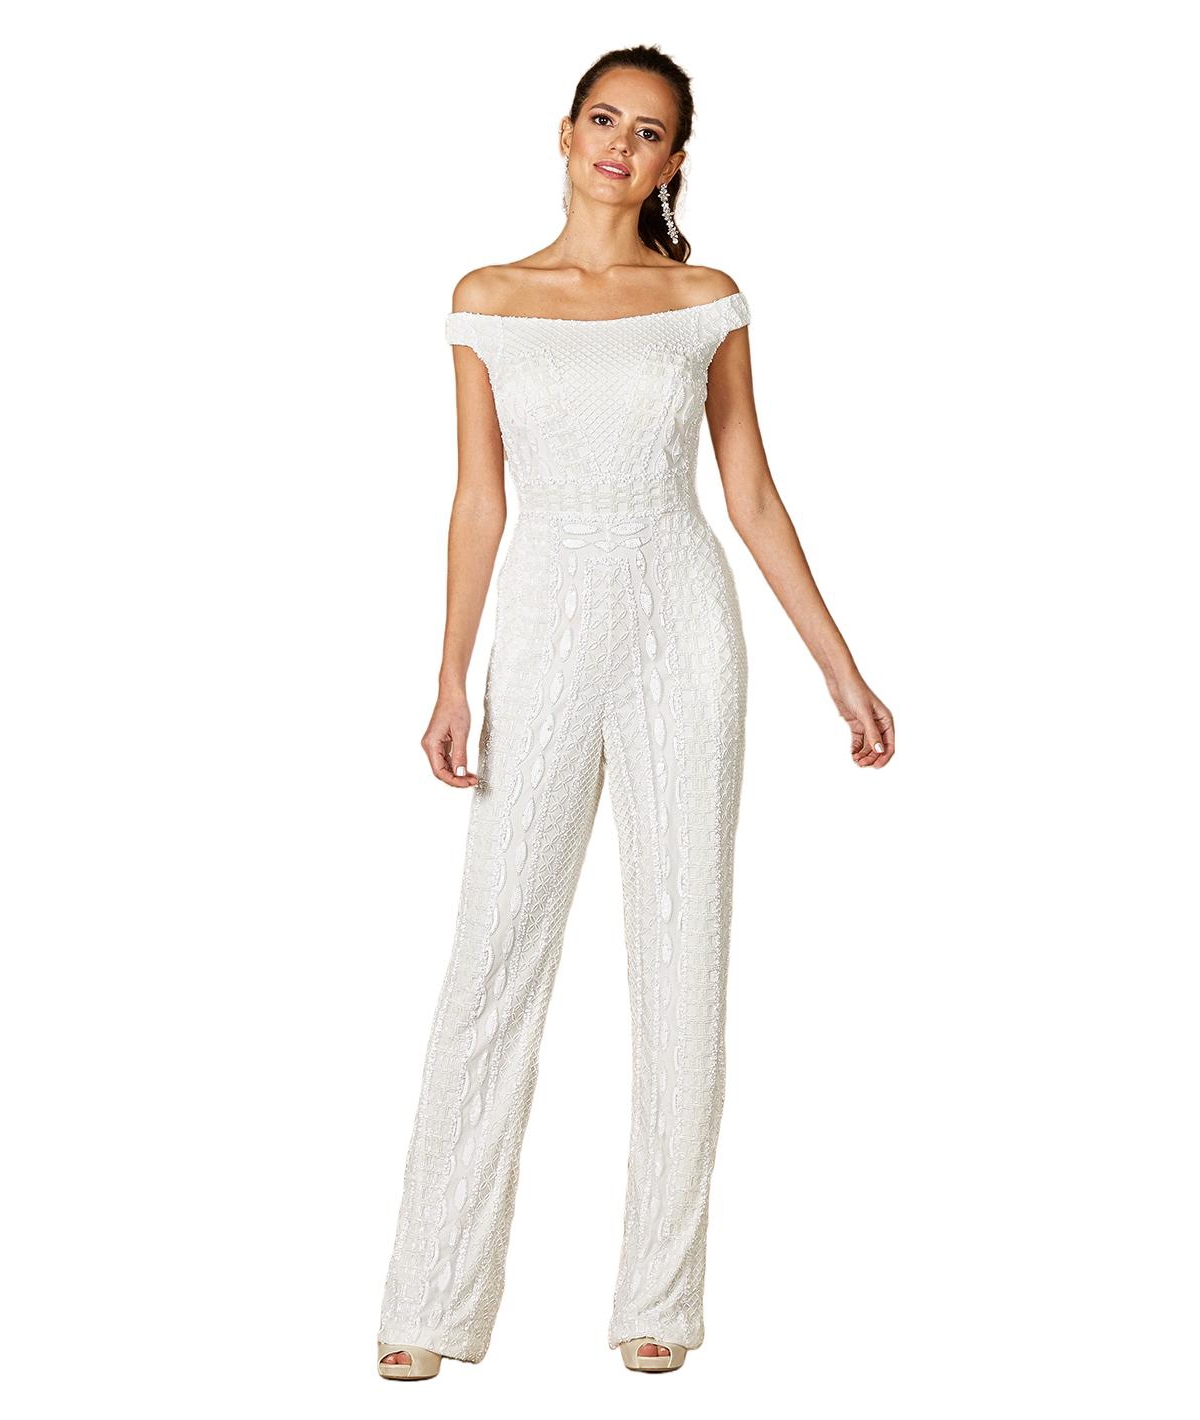 Women's Gabby Beaded Off-the-Shoulder Bridal Jumpsuit - Ivory